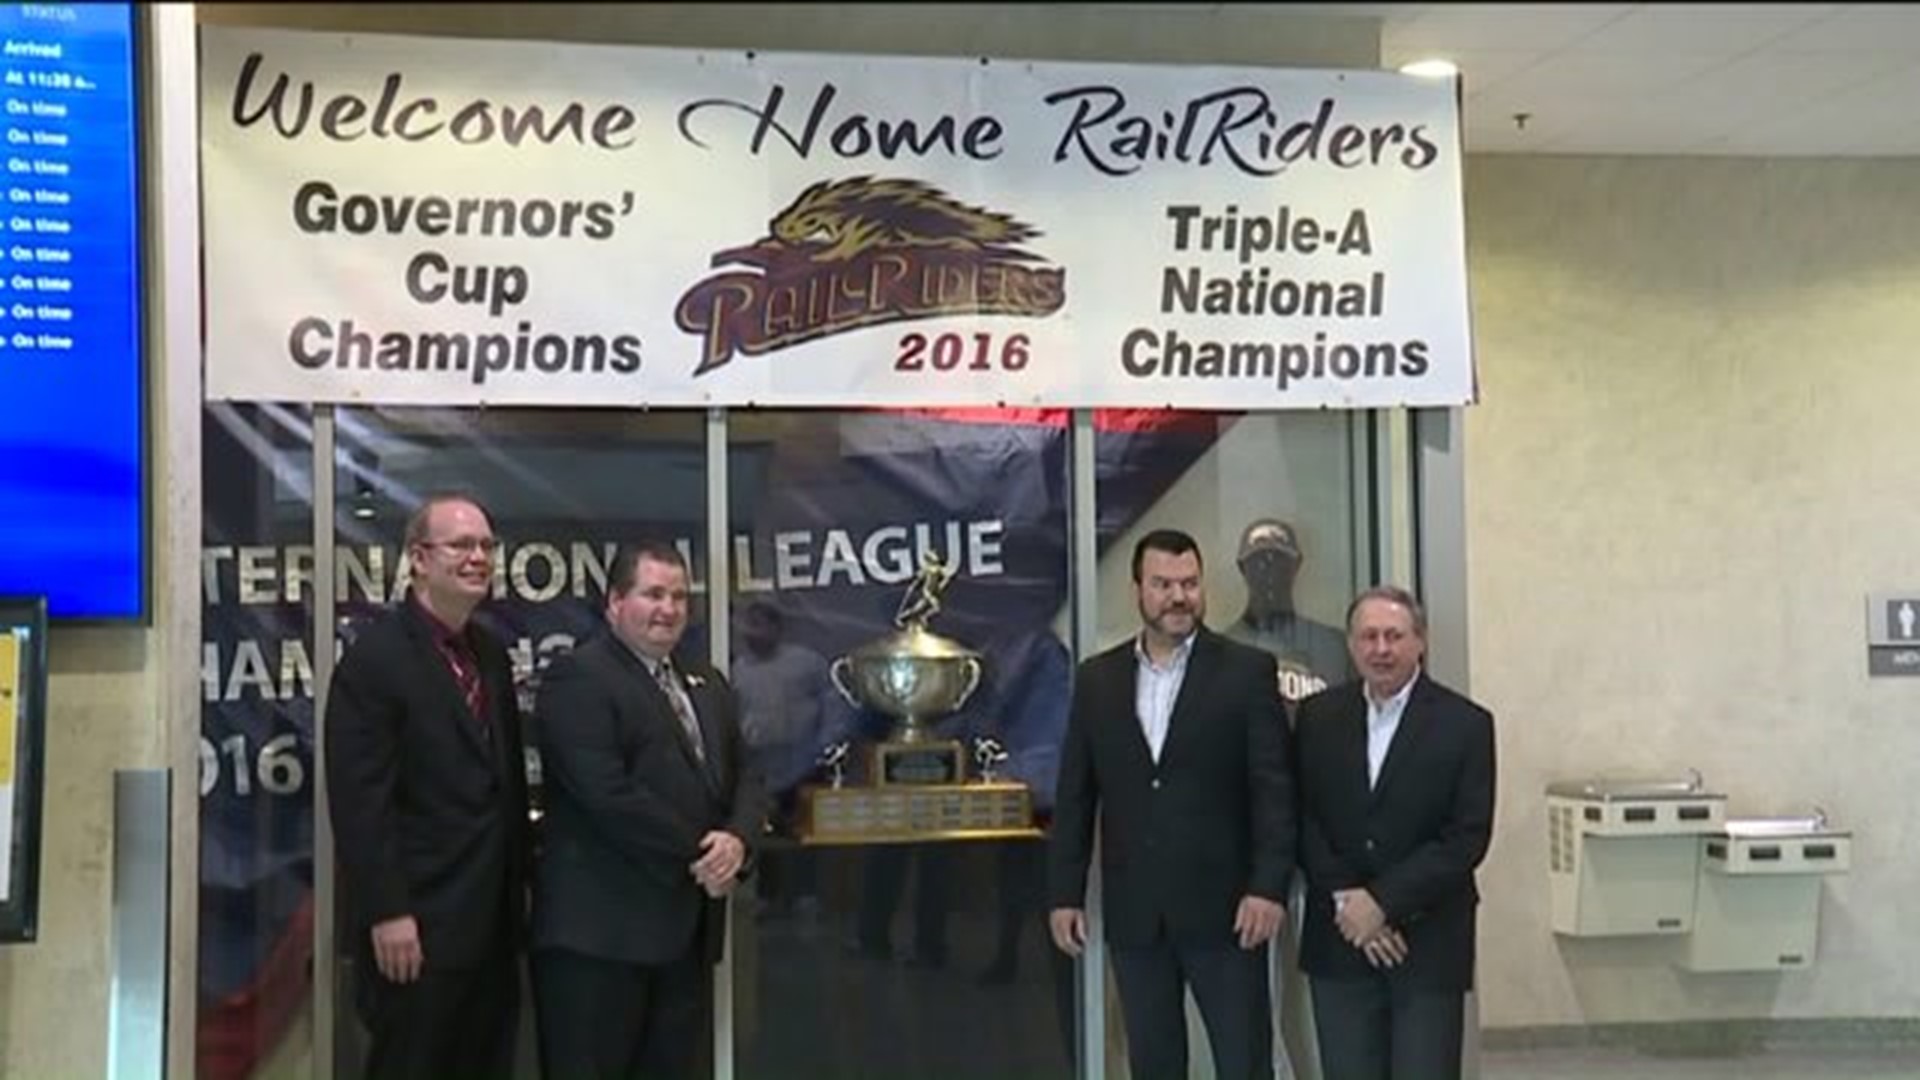 RailRiders Championship Trophies on Display at Airport